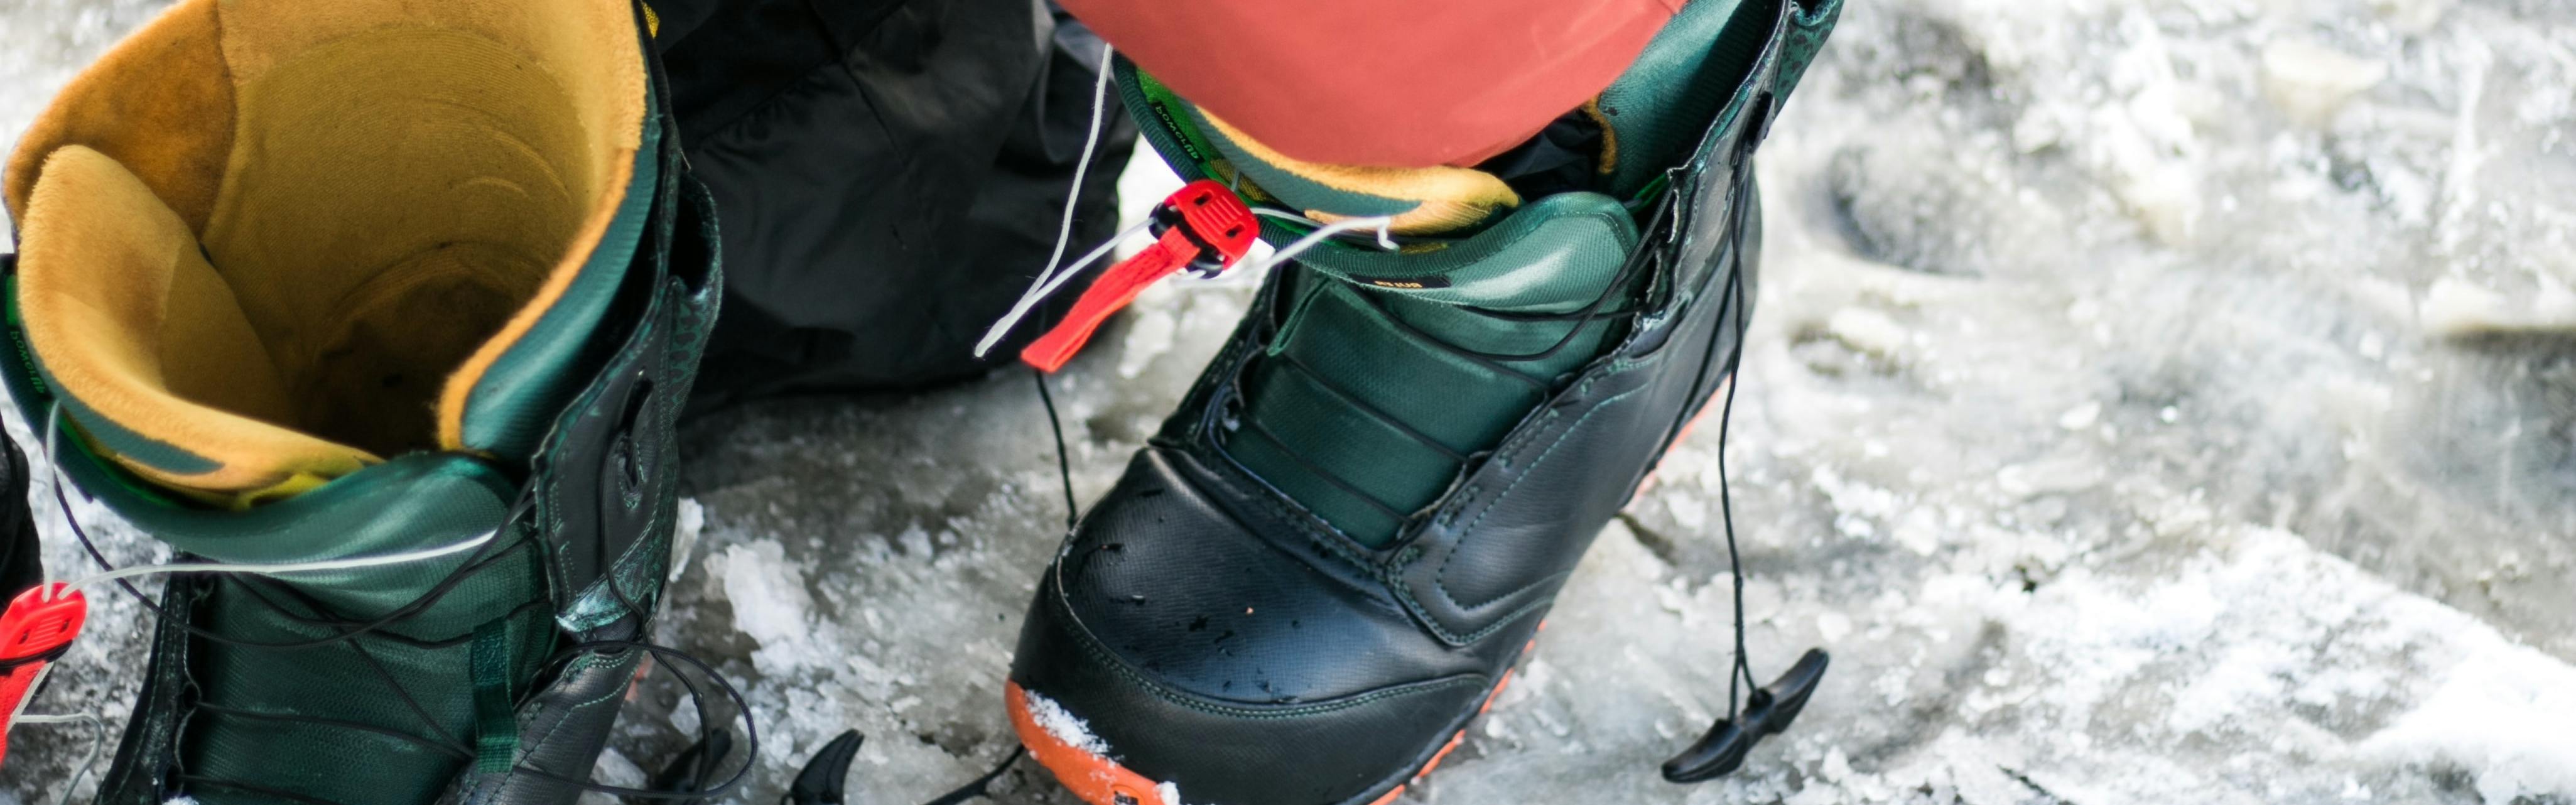 A woman puts her foot in a snowboard boot.